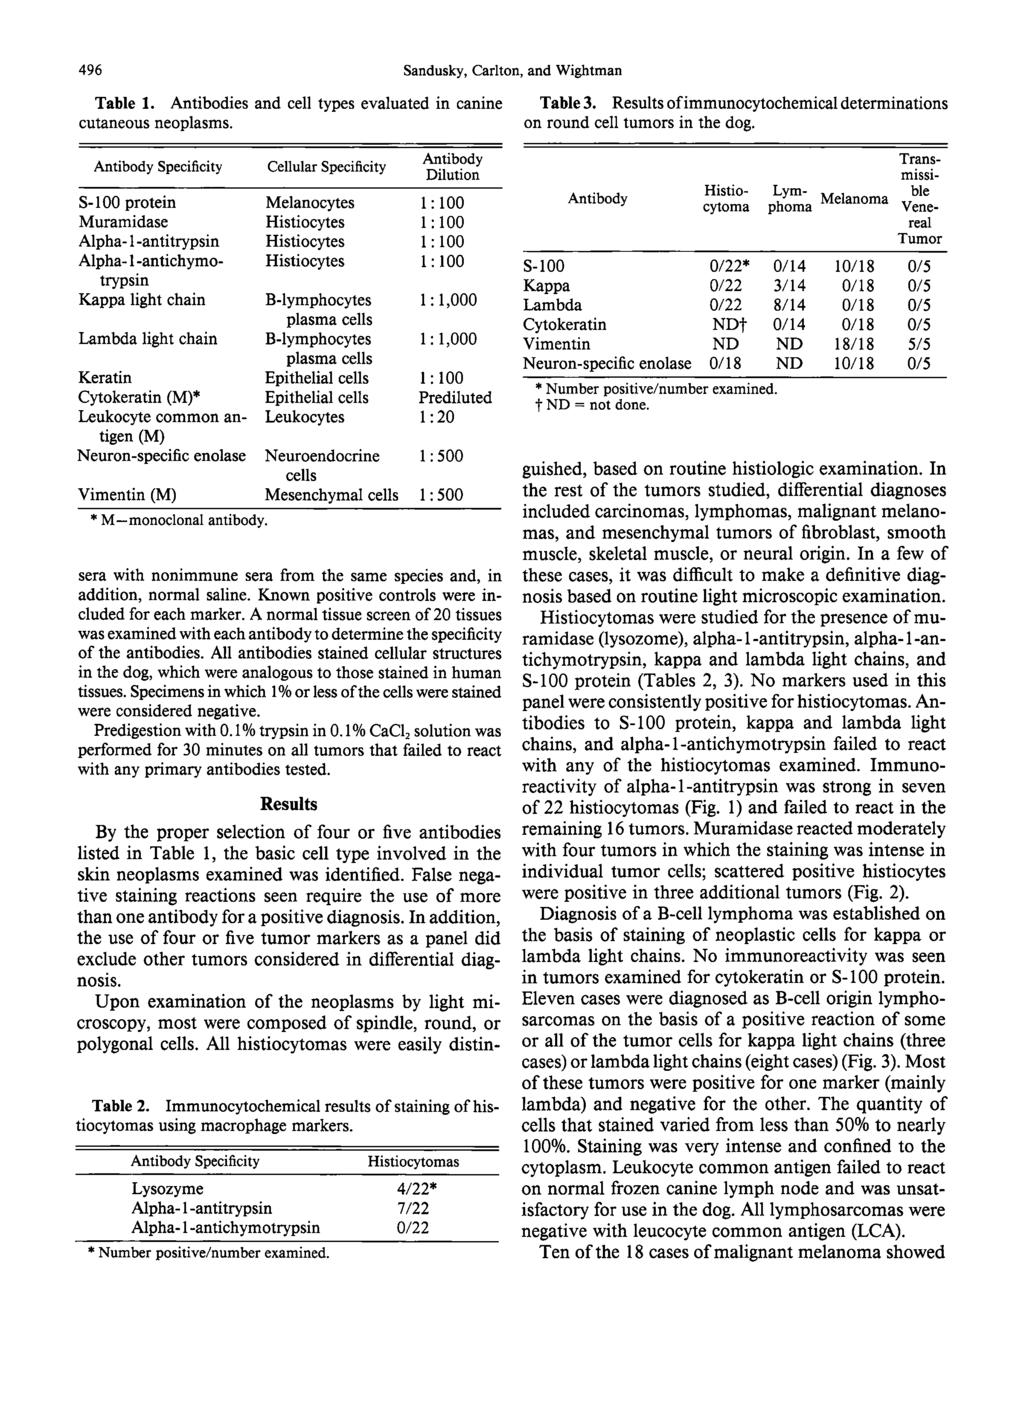 496 Sandusky, Carltc m, and Wightman Table 1. Antibodies and cell types evaluated in canine cutaneous neoplasms. Table 3. Results of immunocytochemical determinations on round cell tumors in the dog.